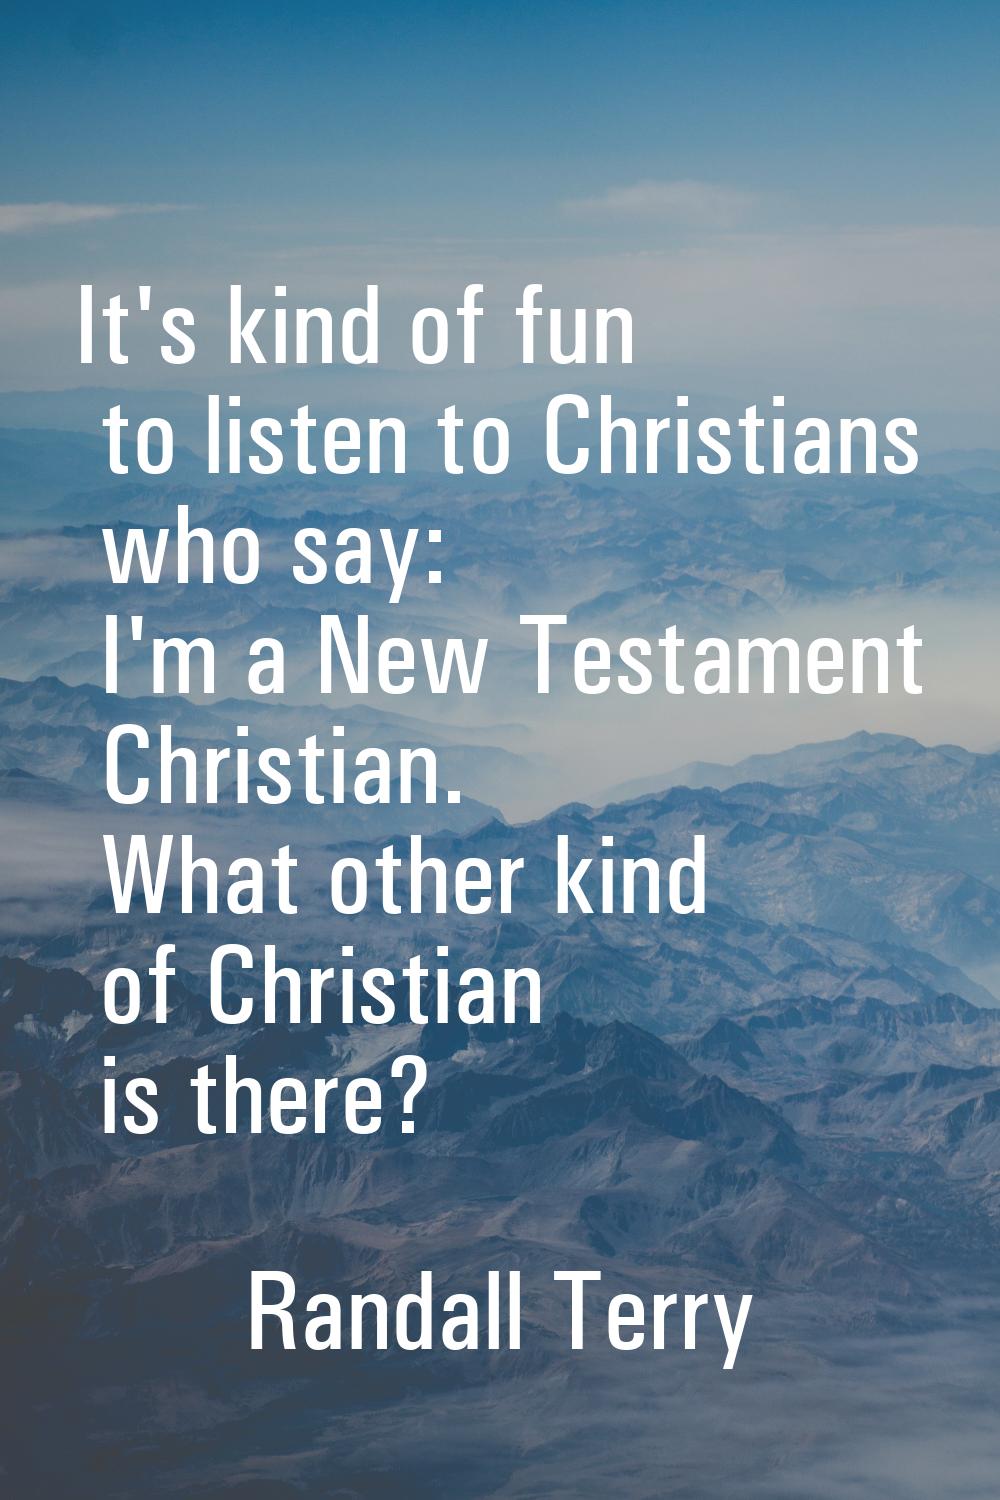 It's kind of fun to listen to Christians who say: I'm a New Testament Christian. What other kind of